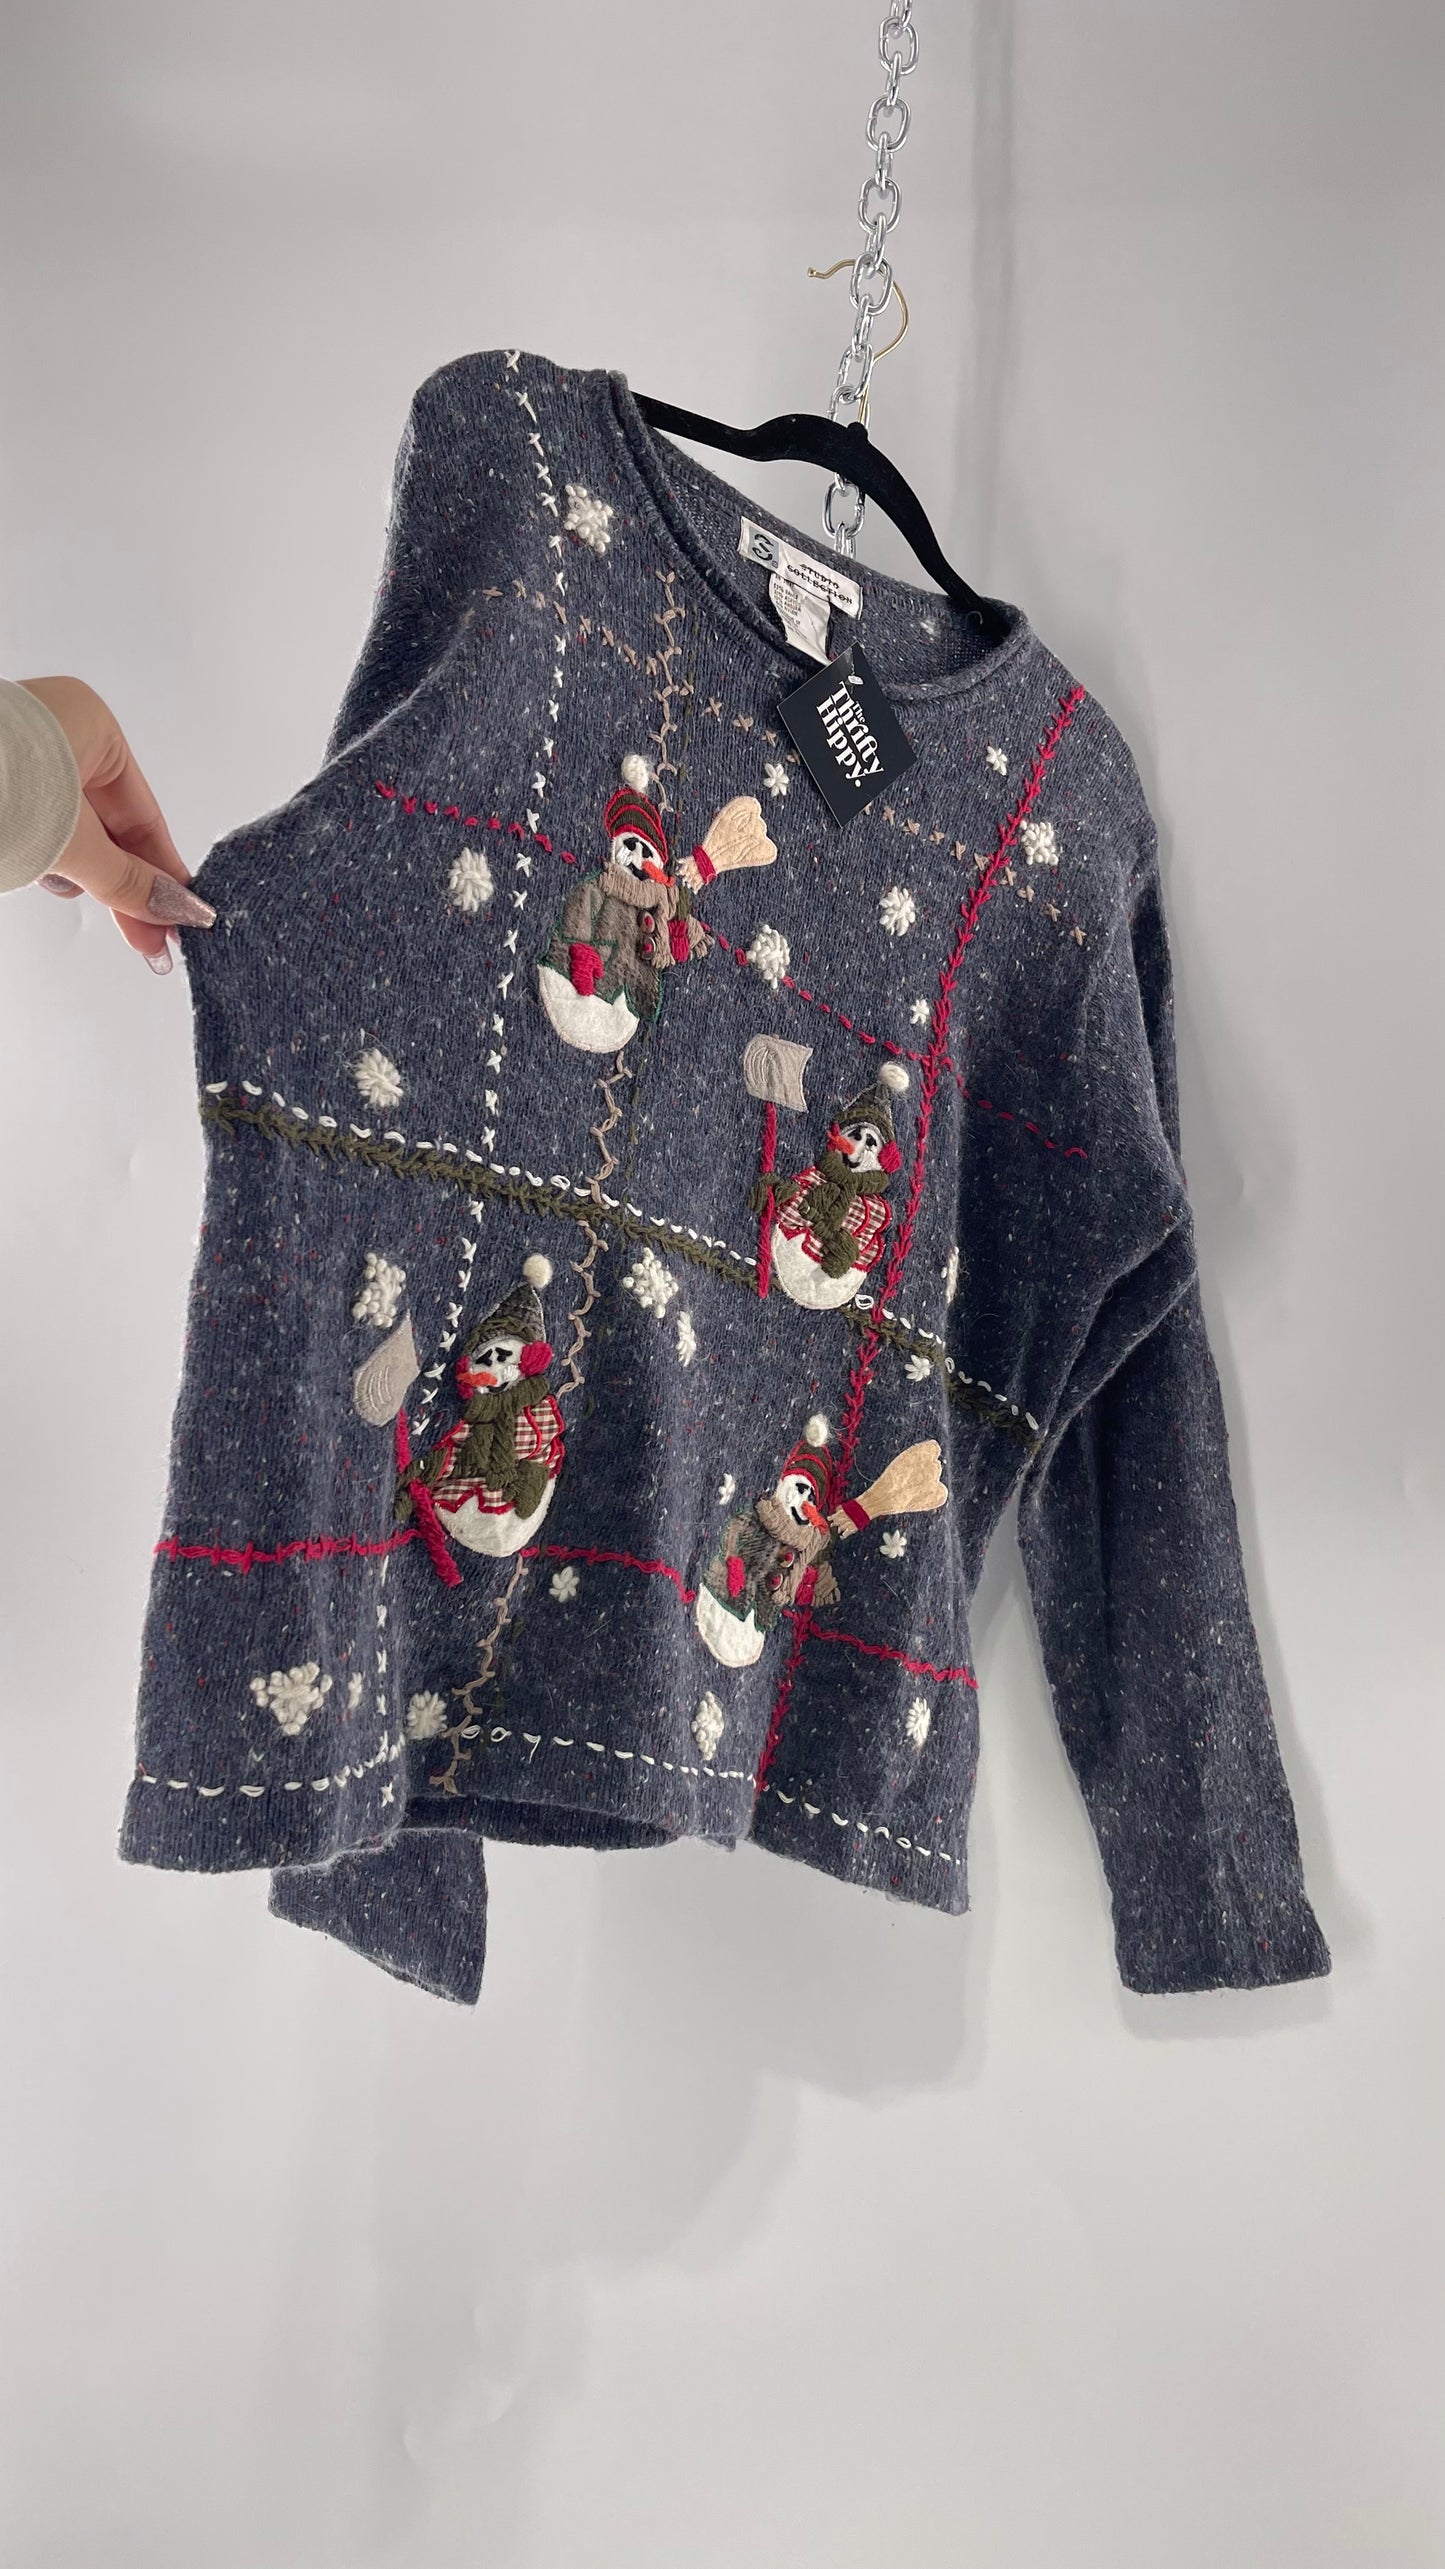 Vintage Urban Outfitters Christmas/Holiday Sweater with Festive Snowmen Snowflakes, and Contrast Stitch Detail  (S)